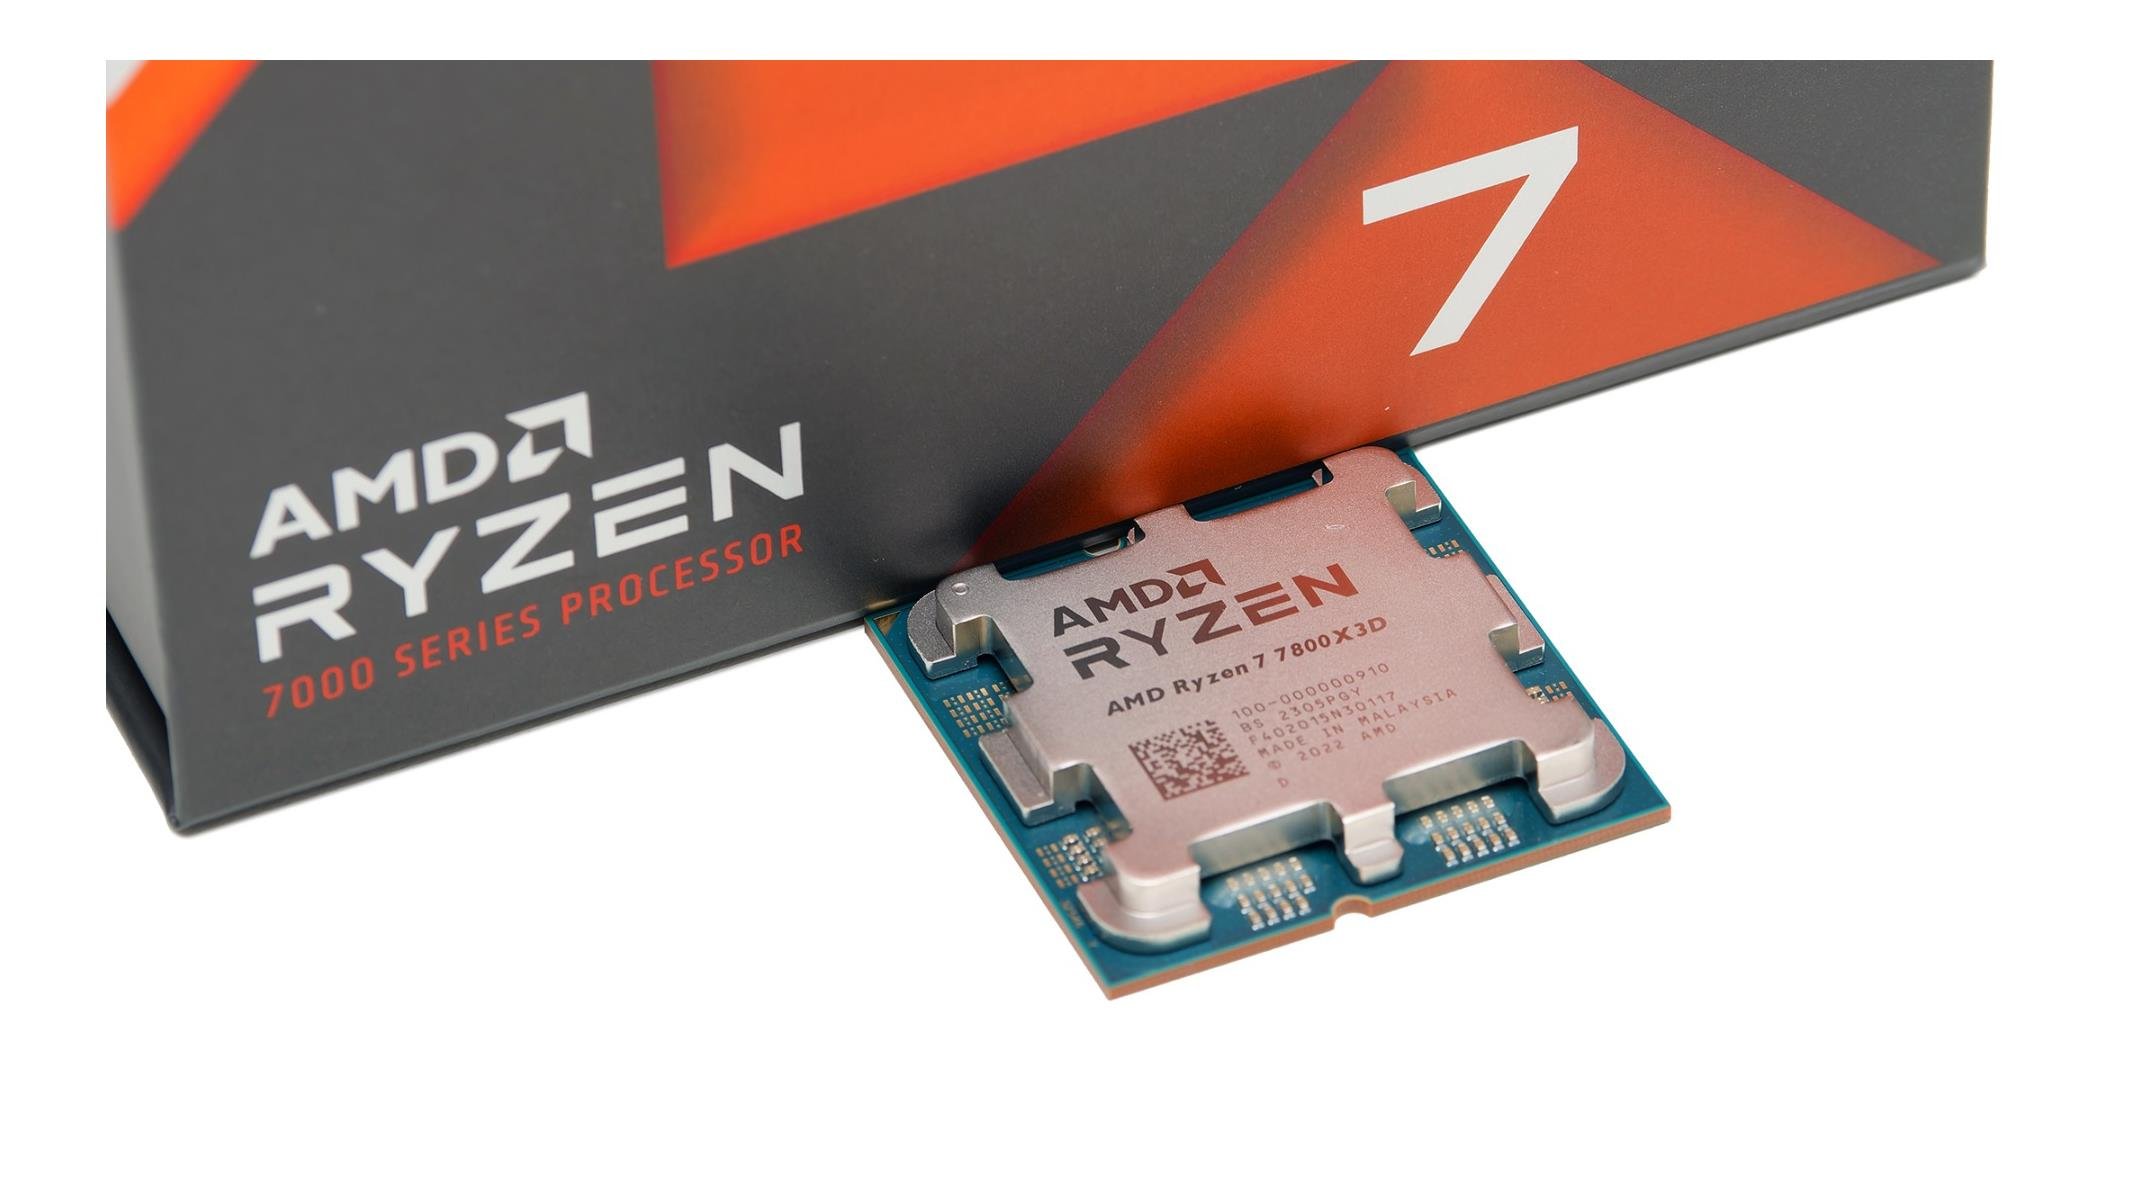 AMD Ryzen 7 7800X3D Review: Return Of The PC Gaming King | HotHardware